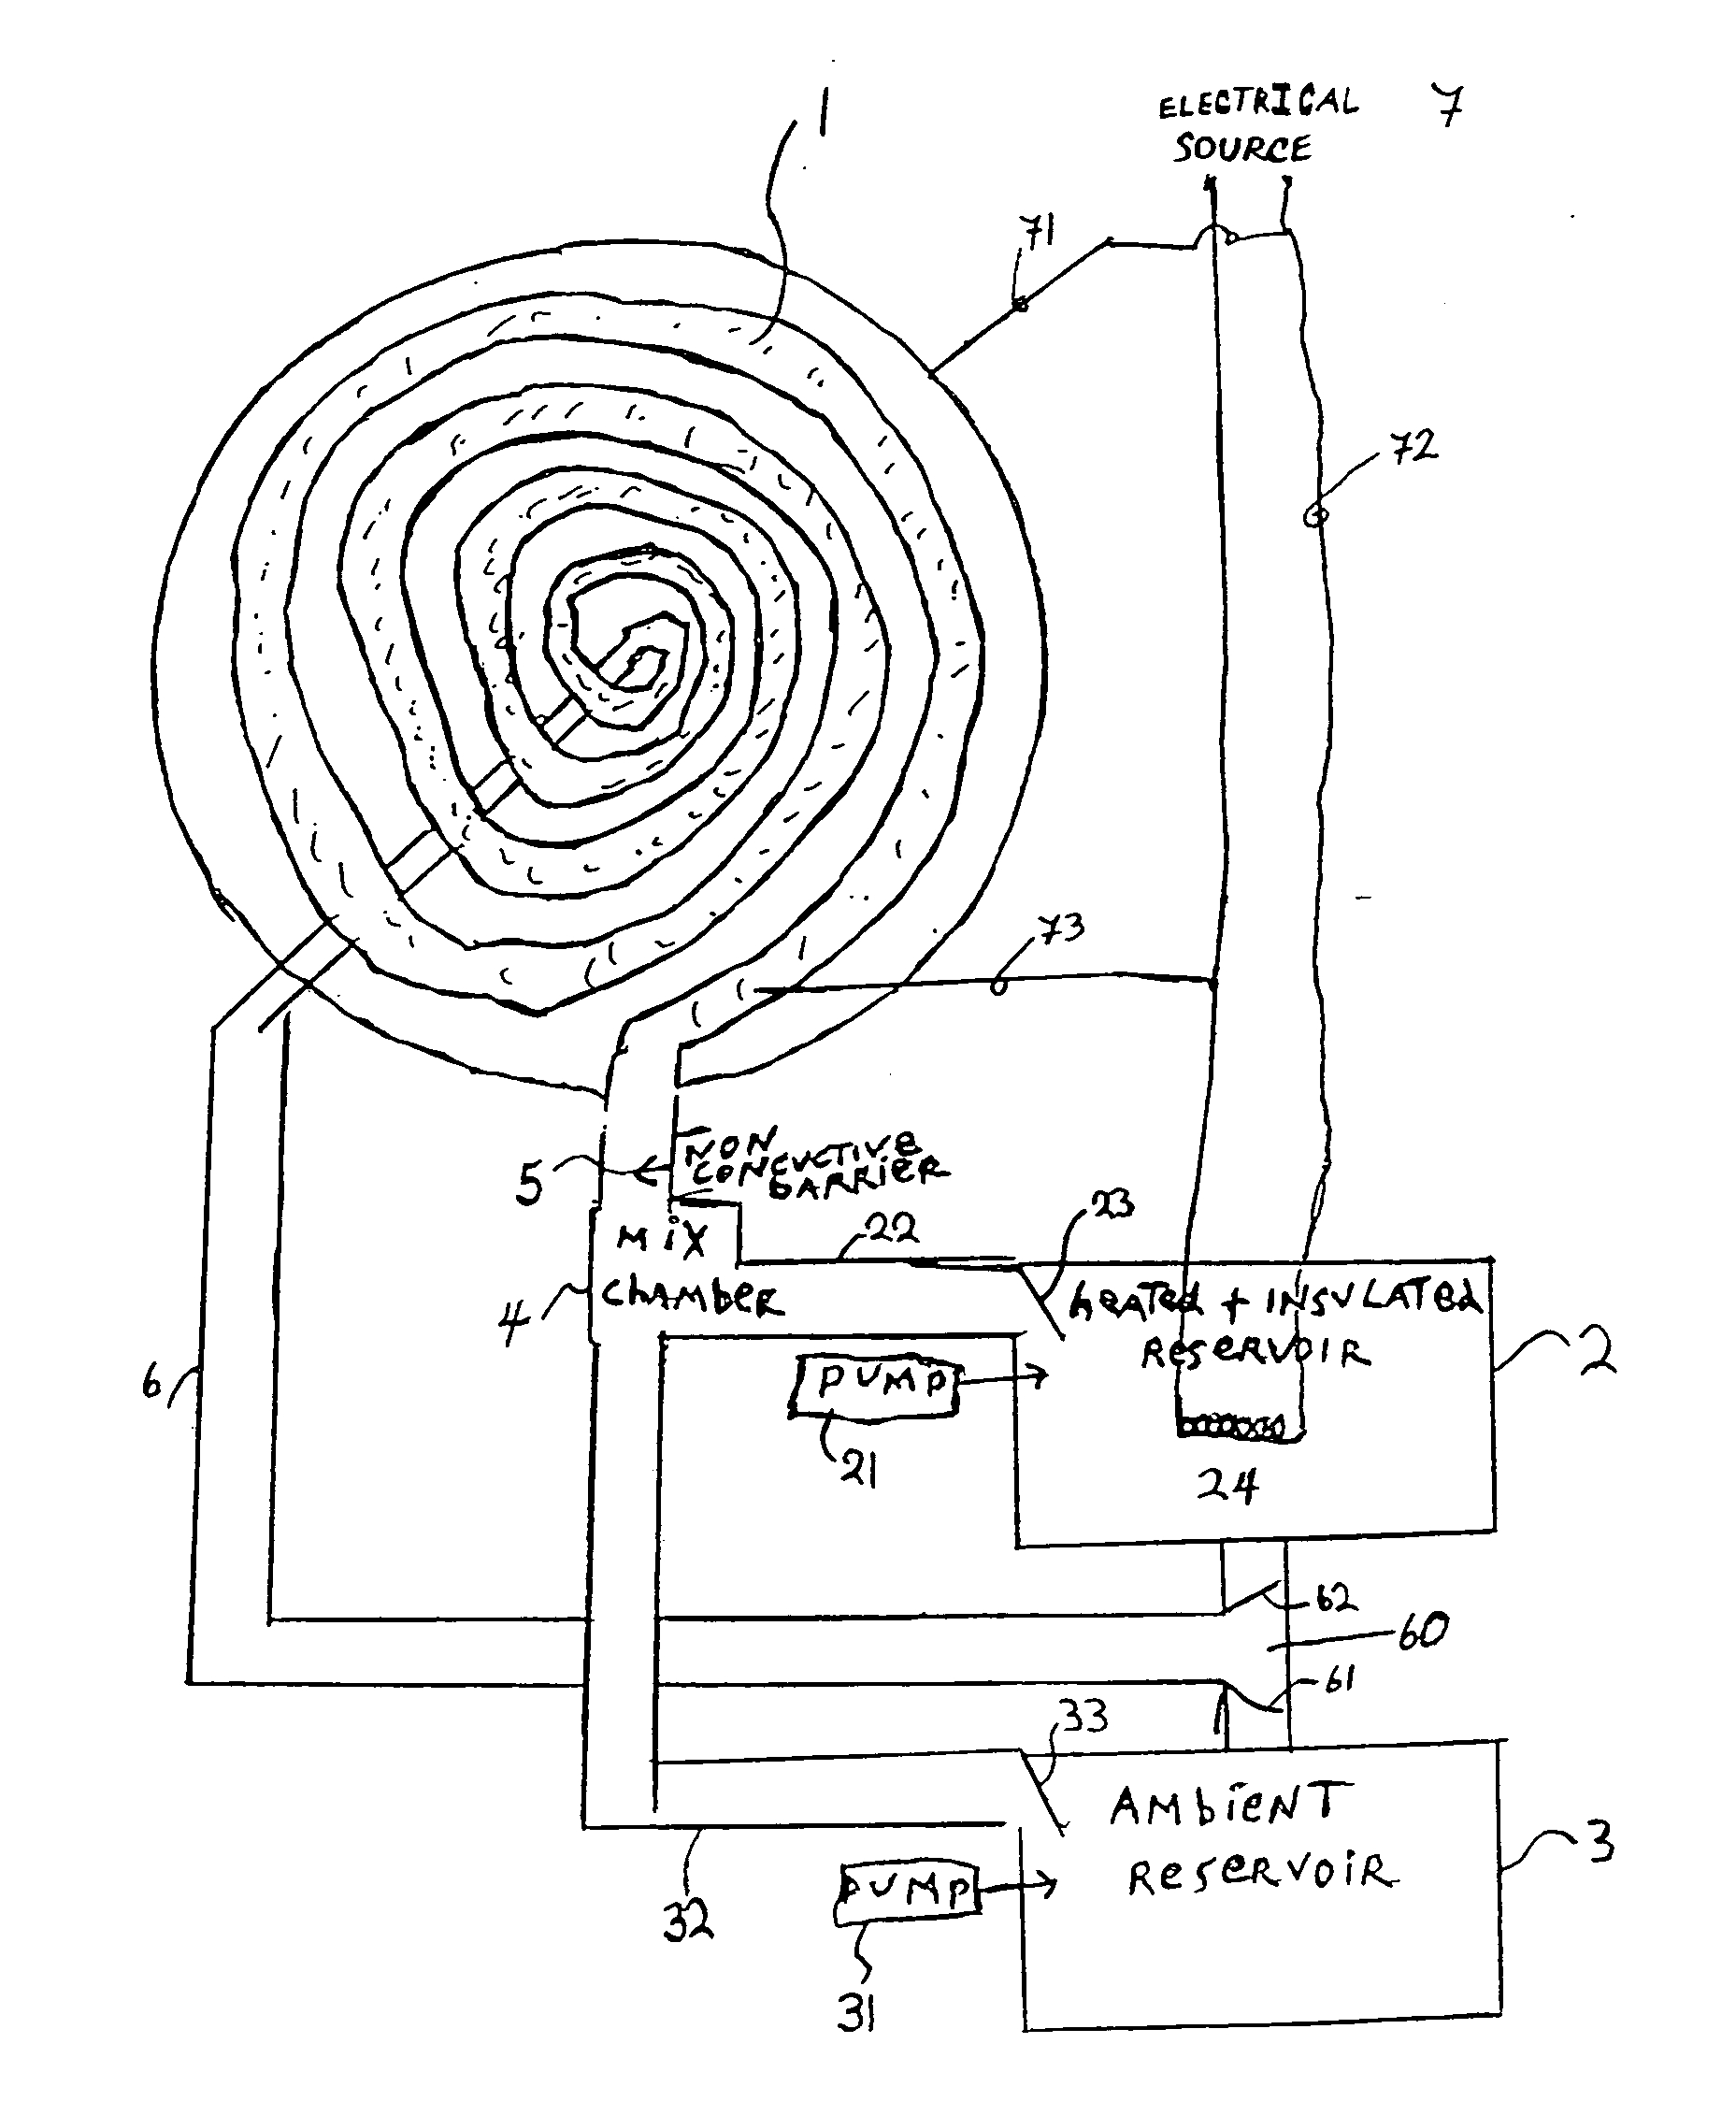 Moderating device for an electric stove heating element